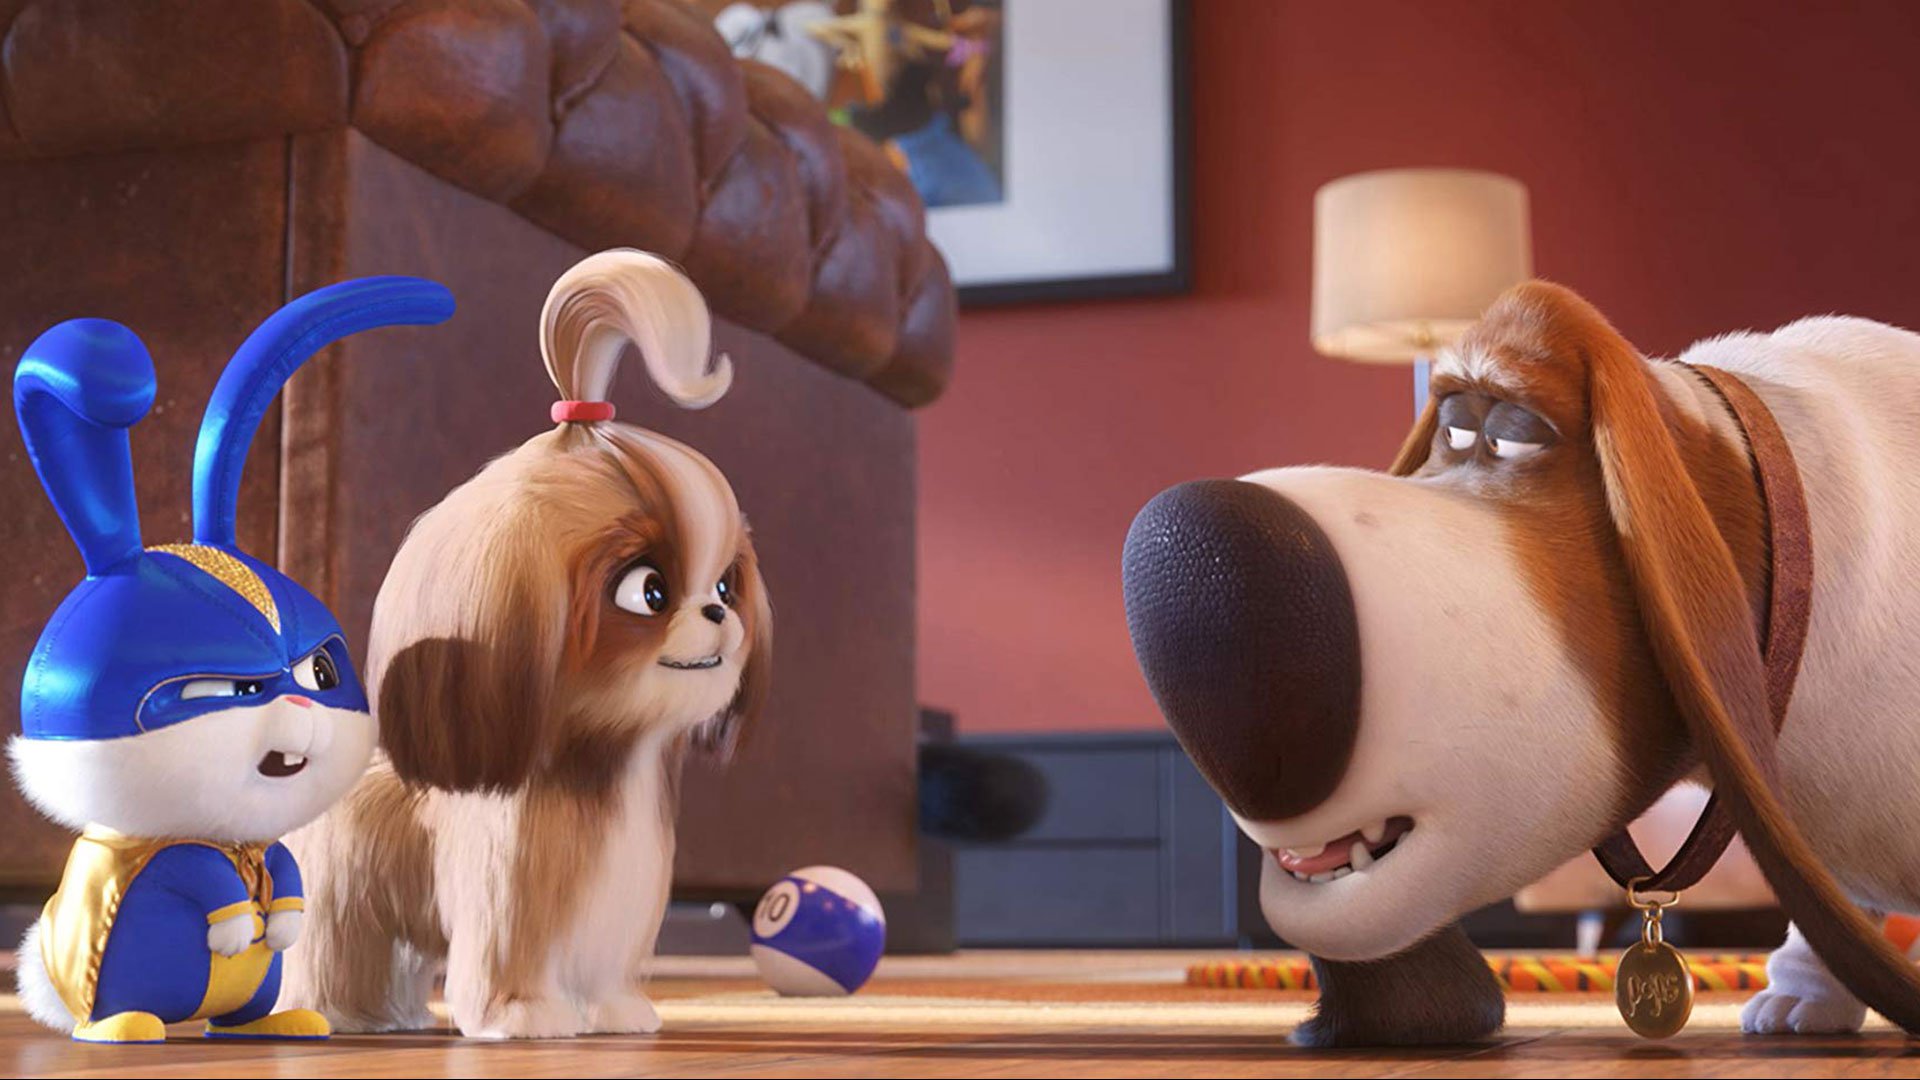 Life of Pets 2